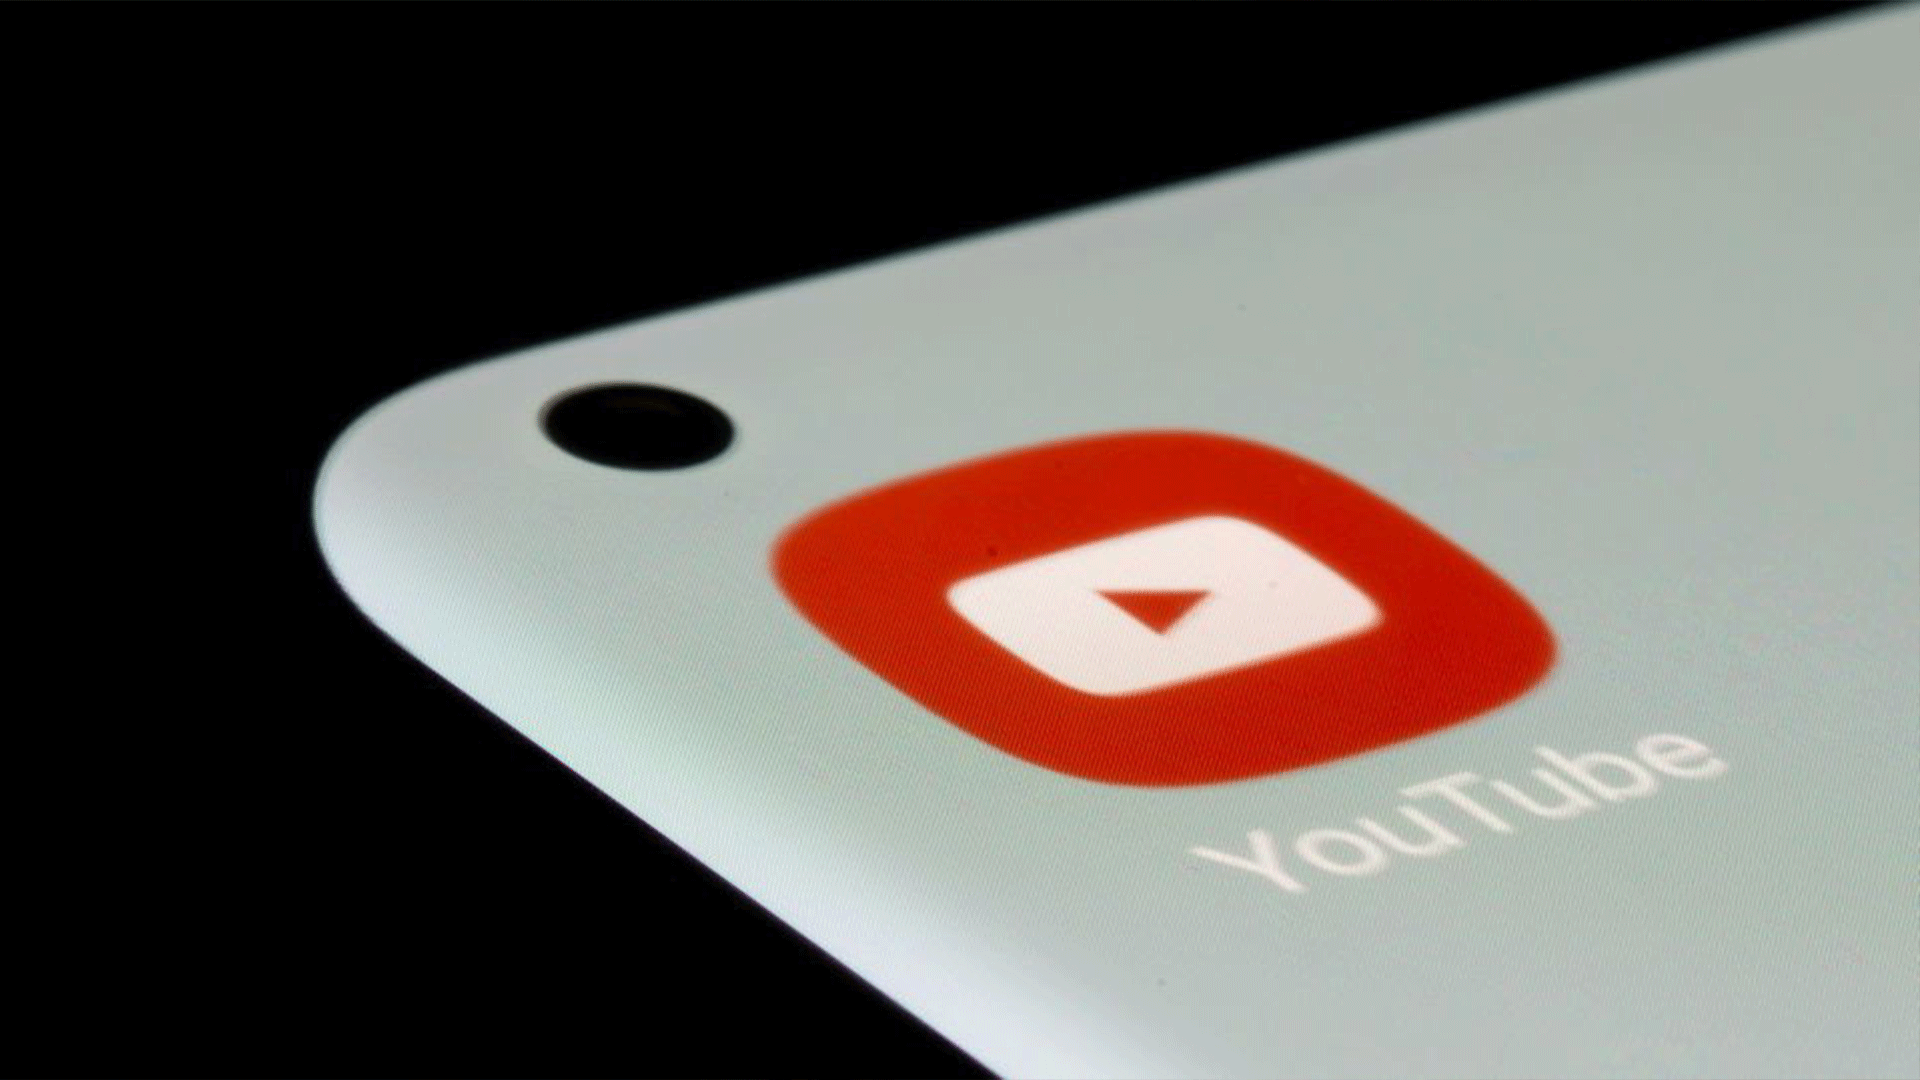  YouTube app is seen on a smartphone in this illustration taken, July 13, 2021. REUTERS/Dado Ruvic/Illustration